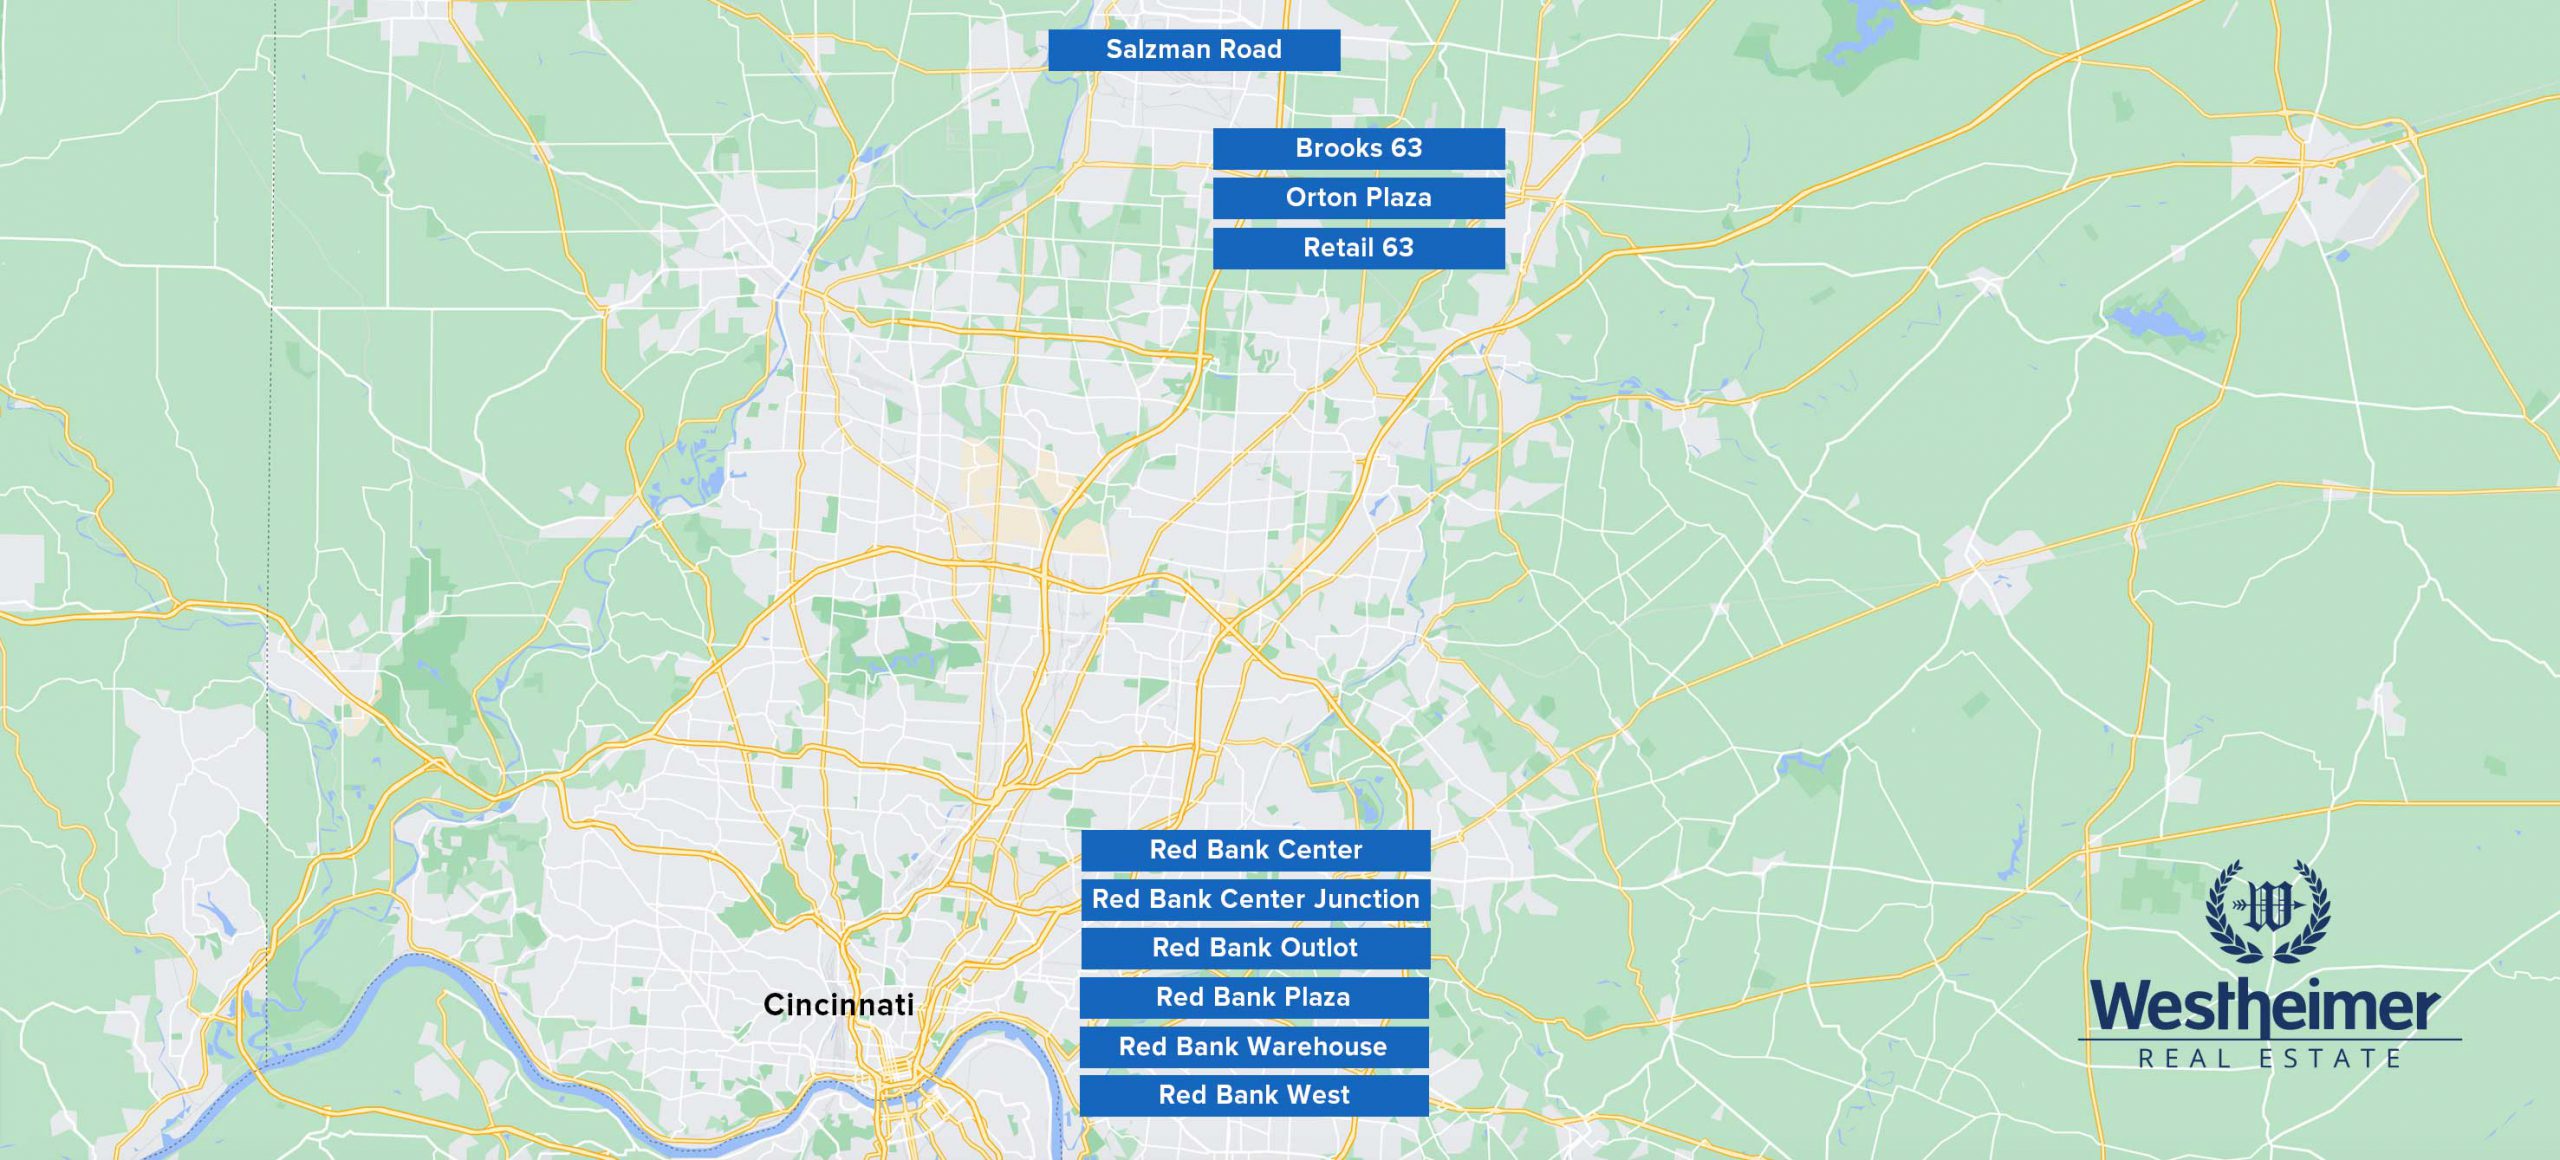 Map of Westheimer Real Estate properties available for lease.